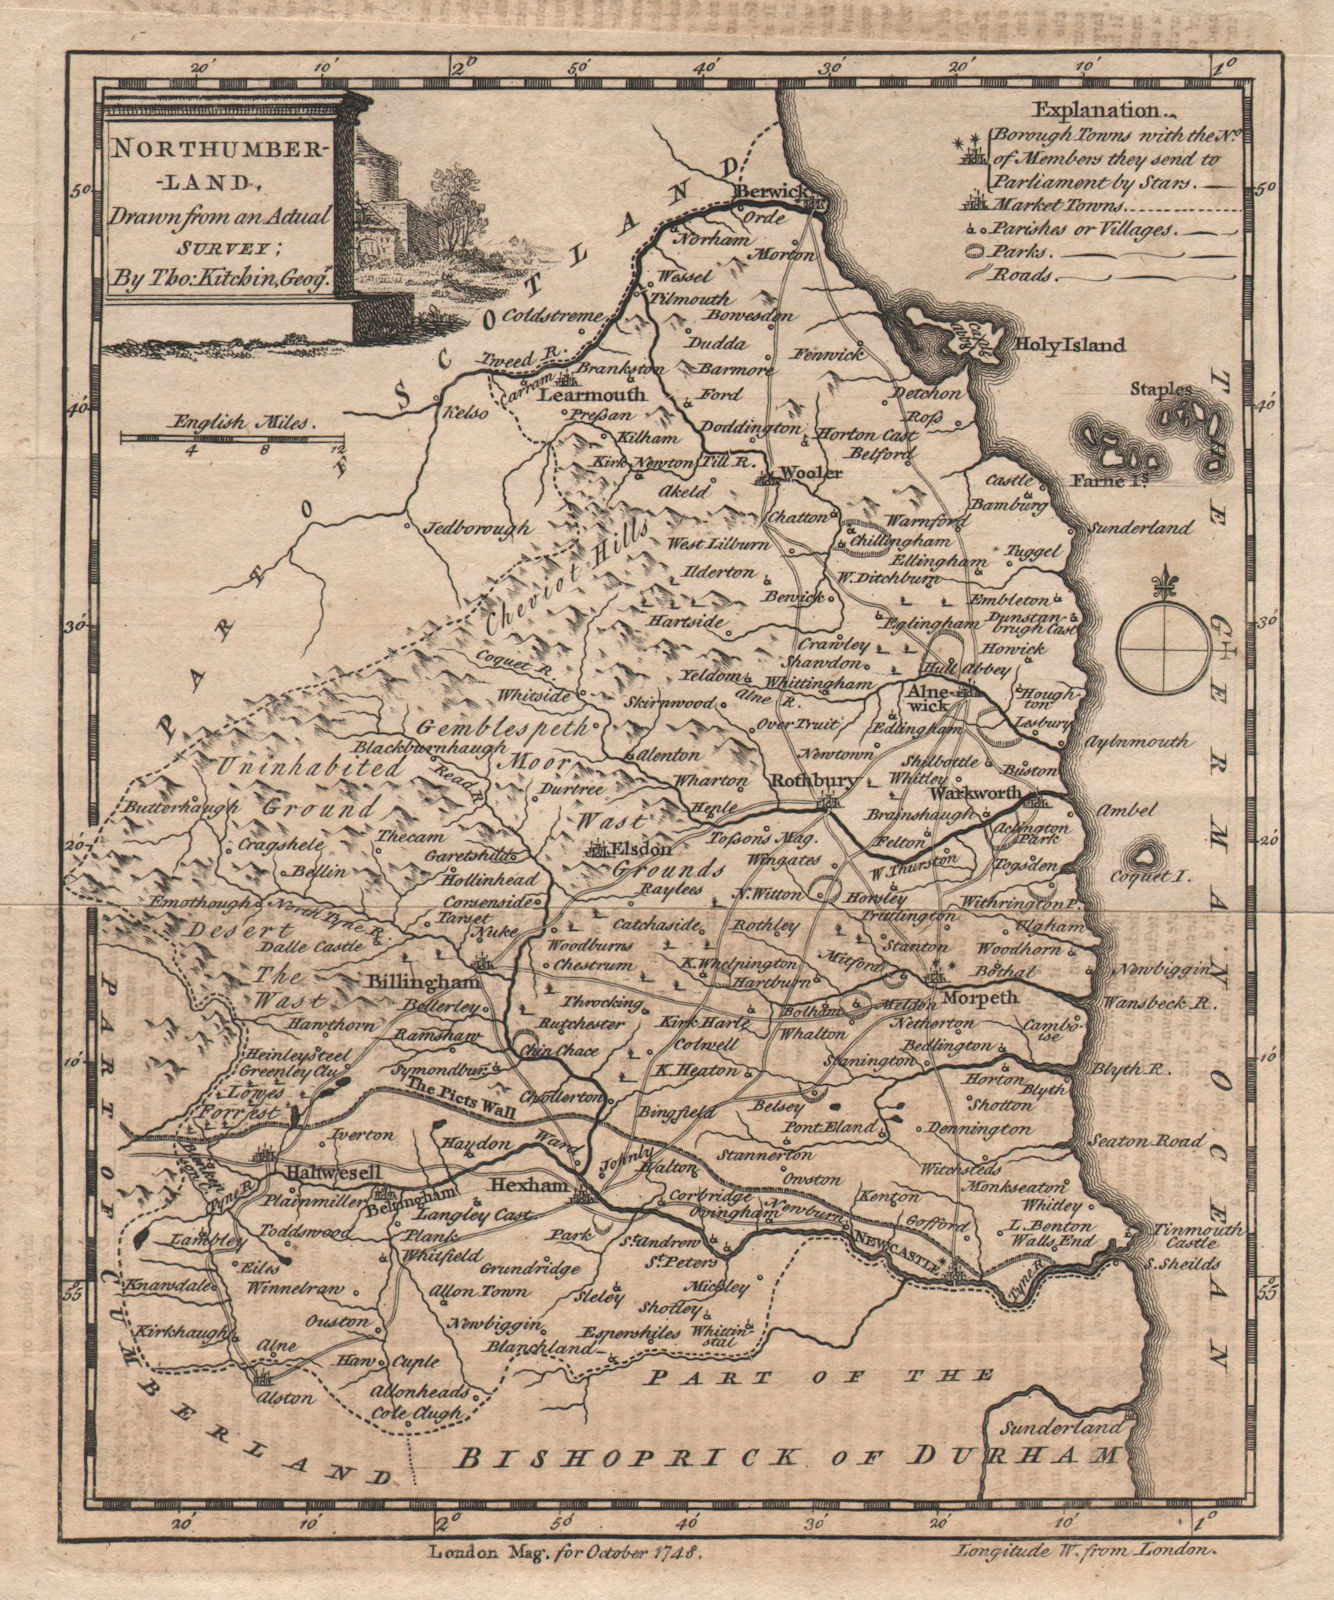 Antique county map of "Northumberland drawn from an actual survey". KITCHIN 1748